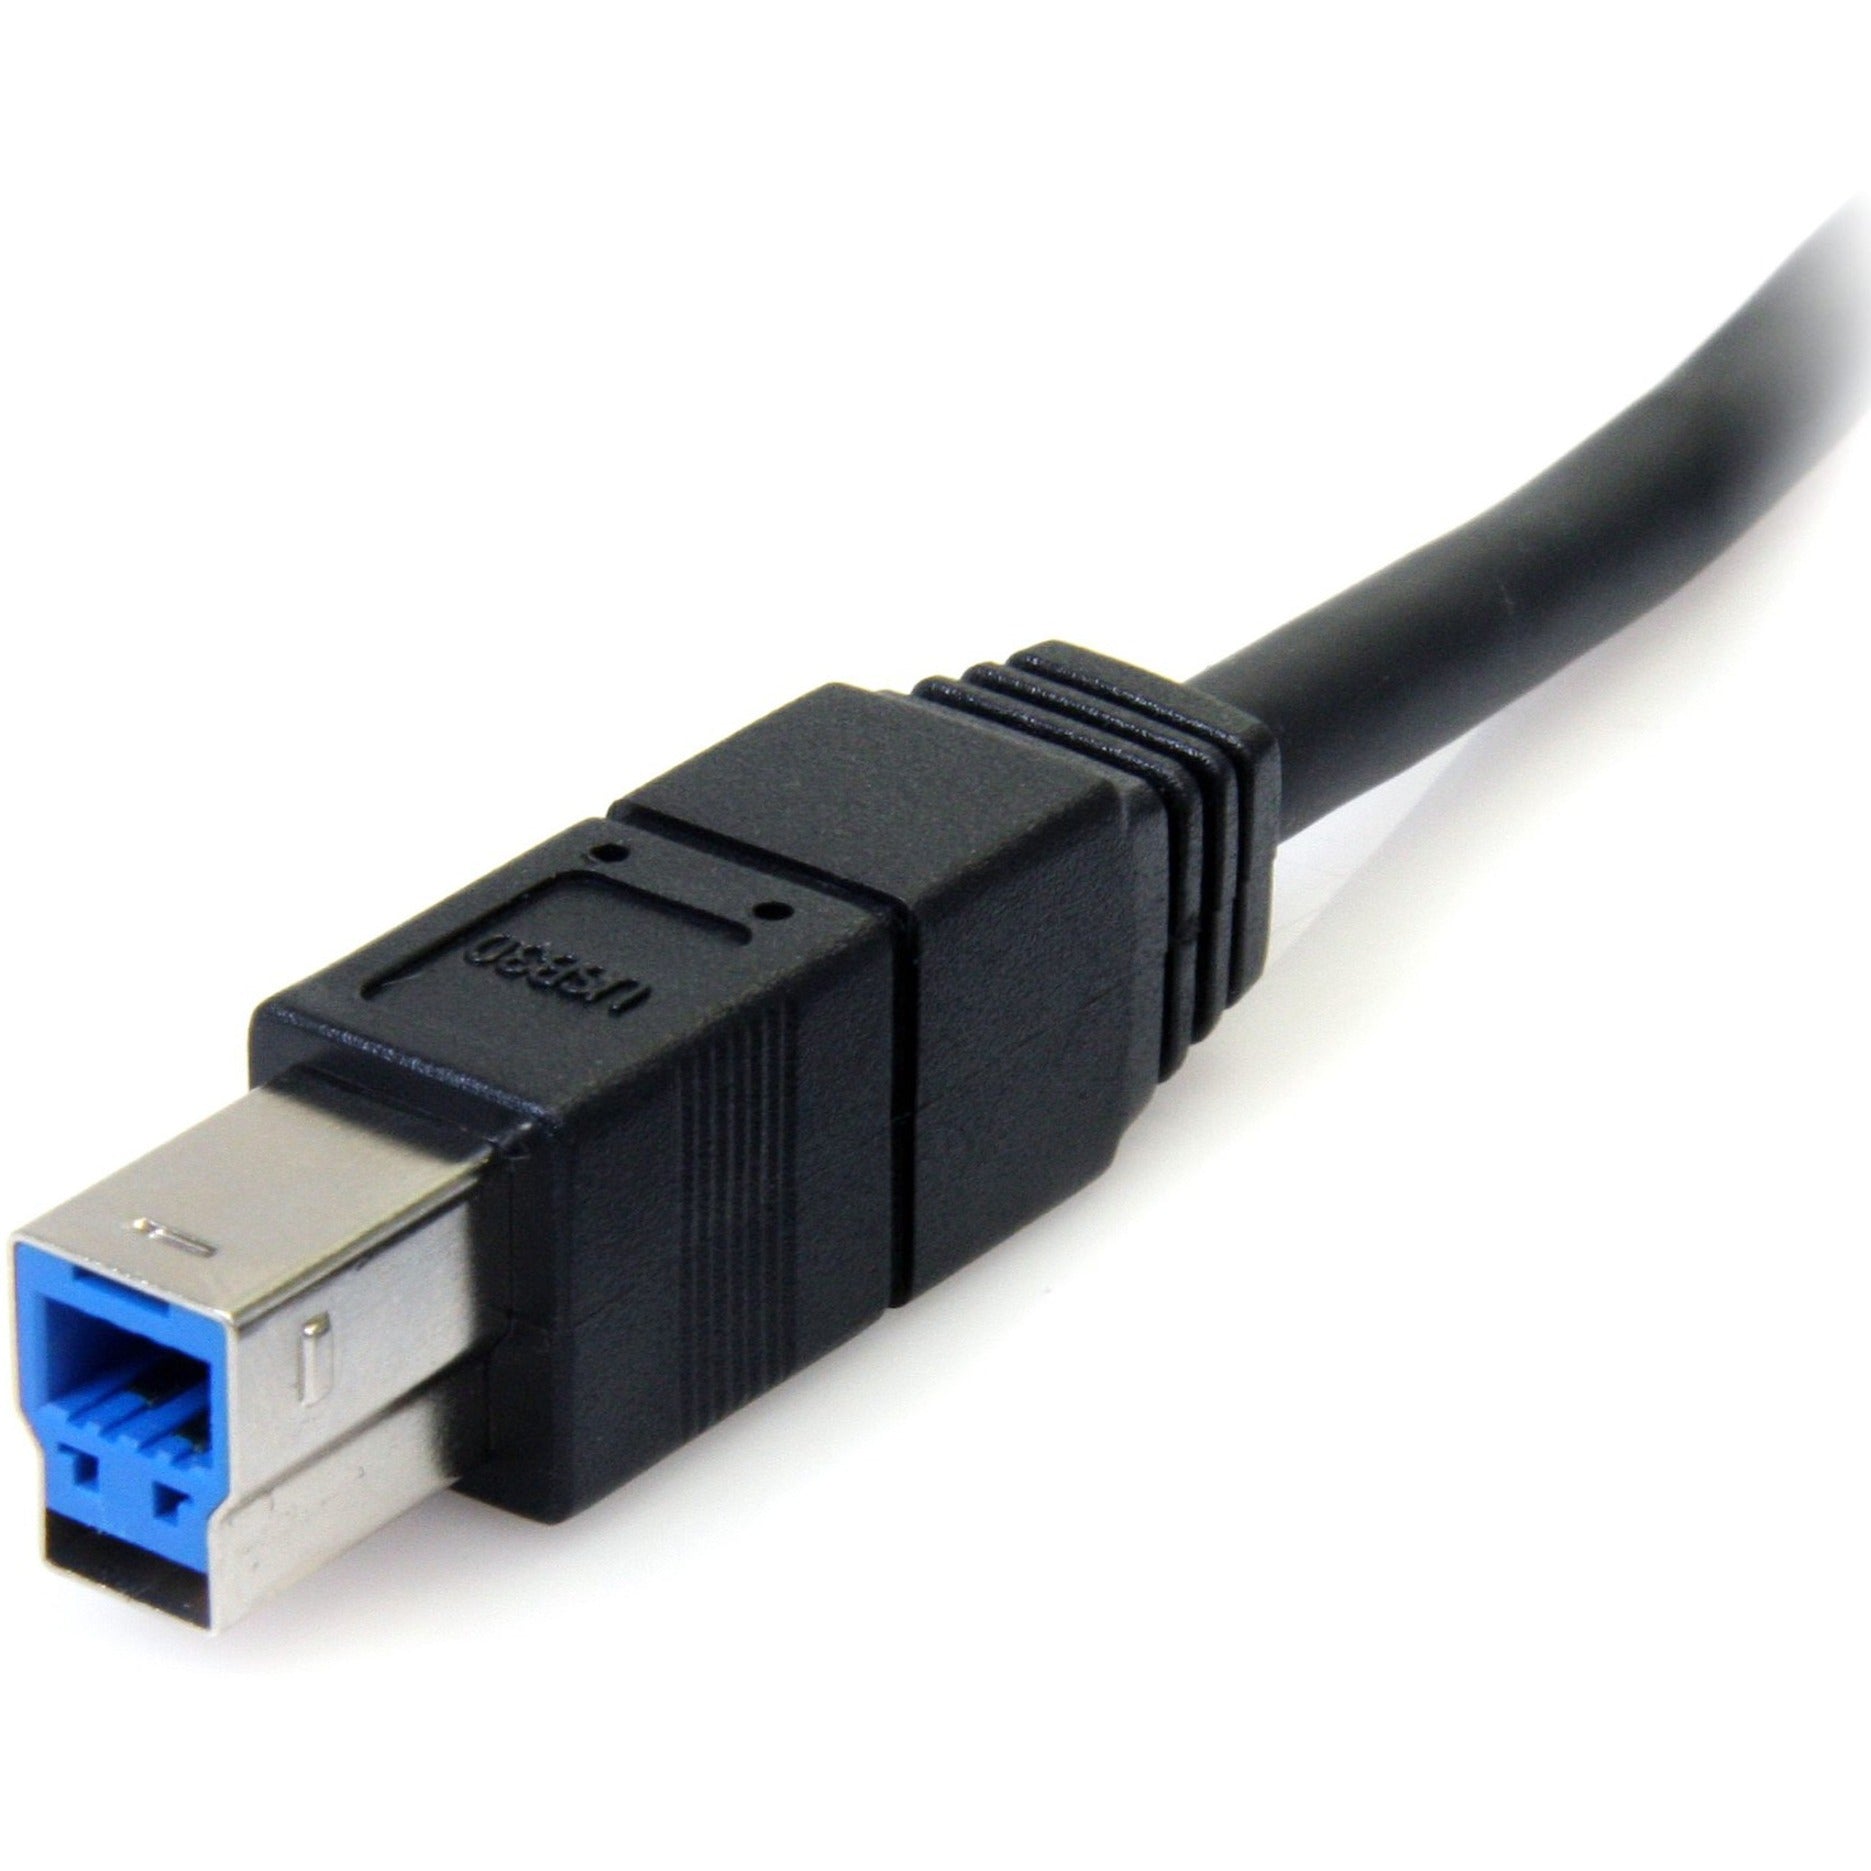 StarTech.com USB3SAB6BK 6 ft Black SuperSpeed USB 3.0 Cable A to B - M/M, High-Speed Data Transfer, Lifetime Warranty